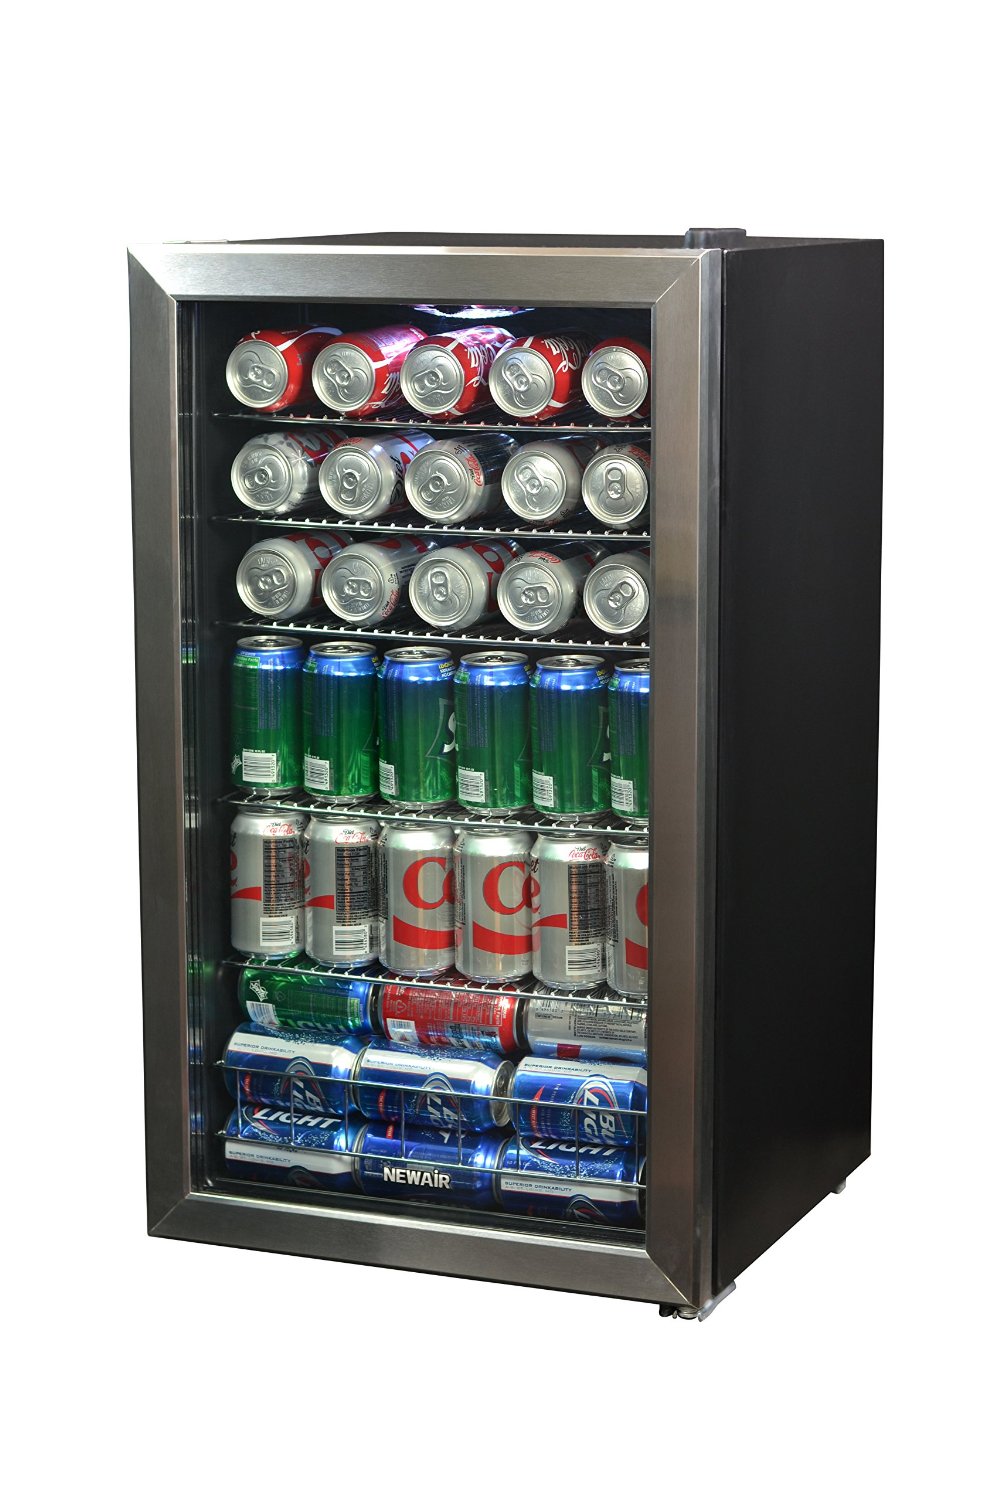 NewAir AB-1200 126-Can Beverage Cooler